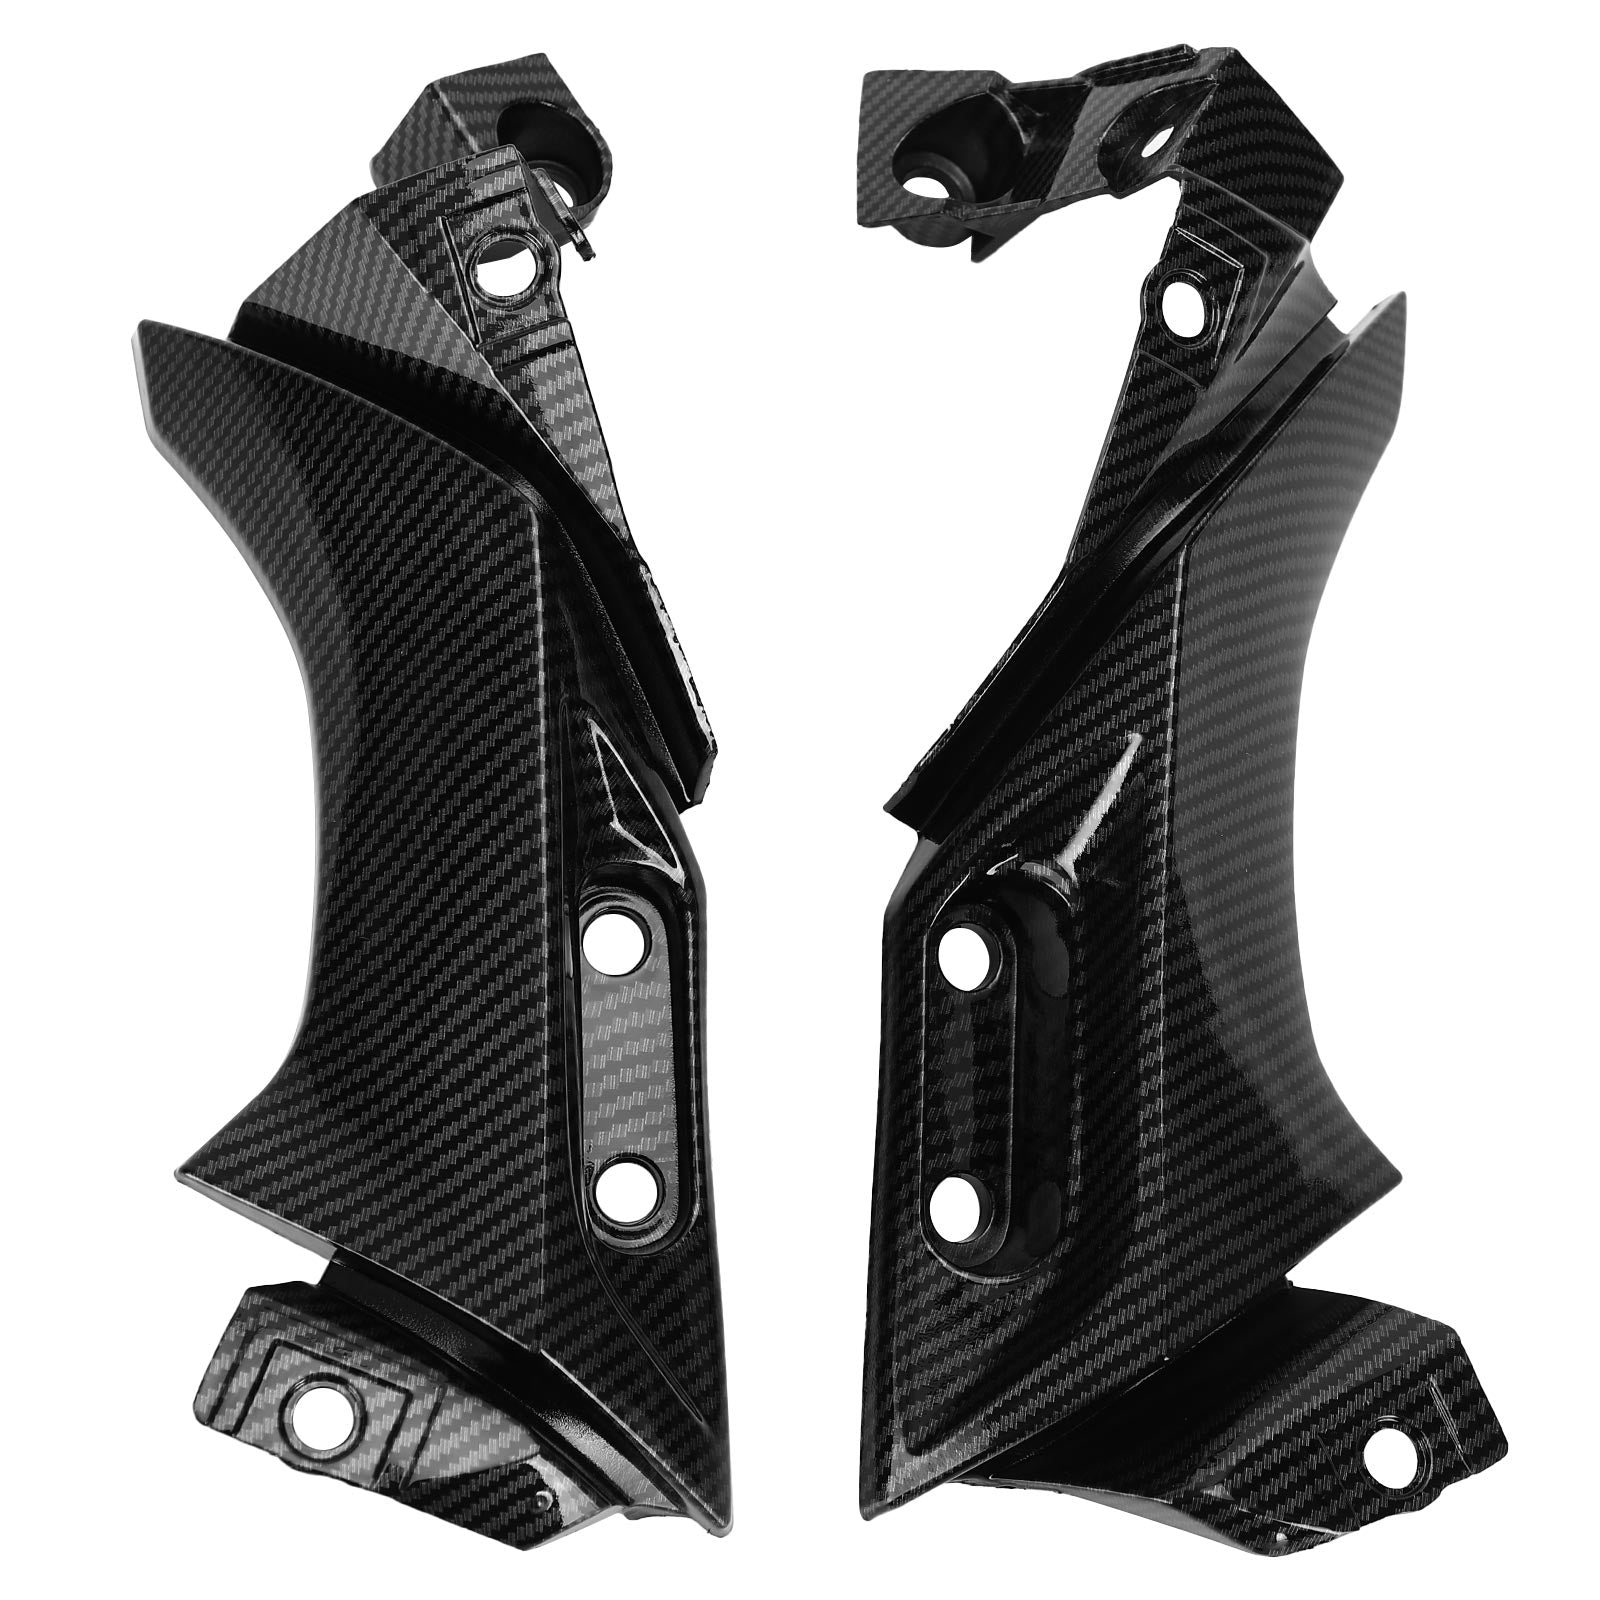 Side Frame Mid Cover Panel Fairing Cowl for Yamaha YZF R1 2004-2006 Generic